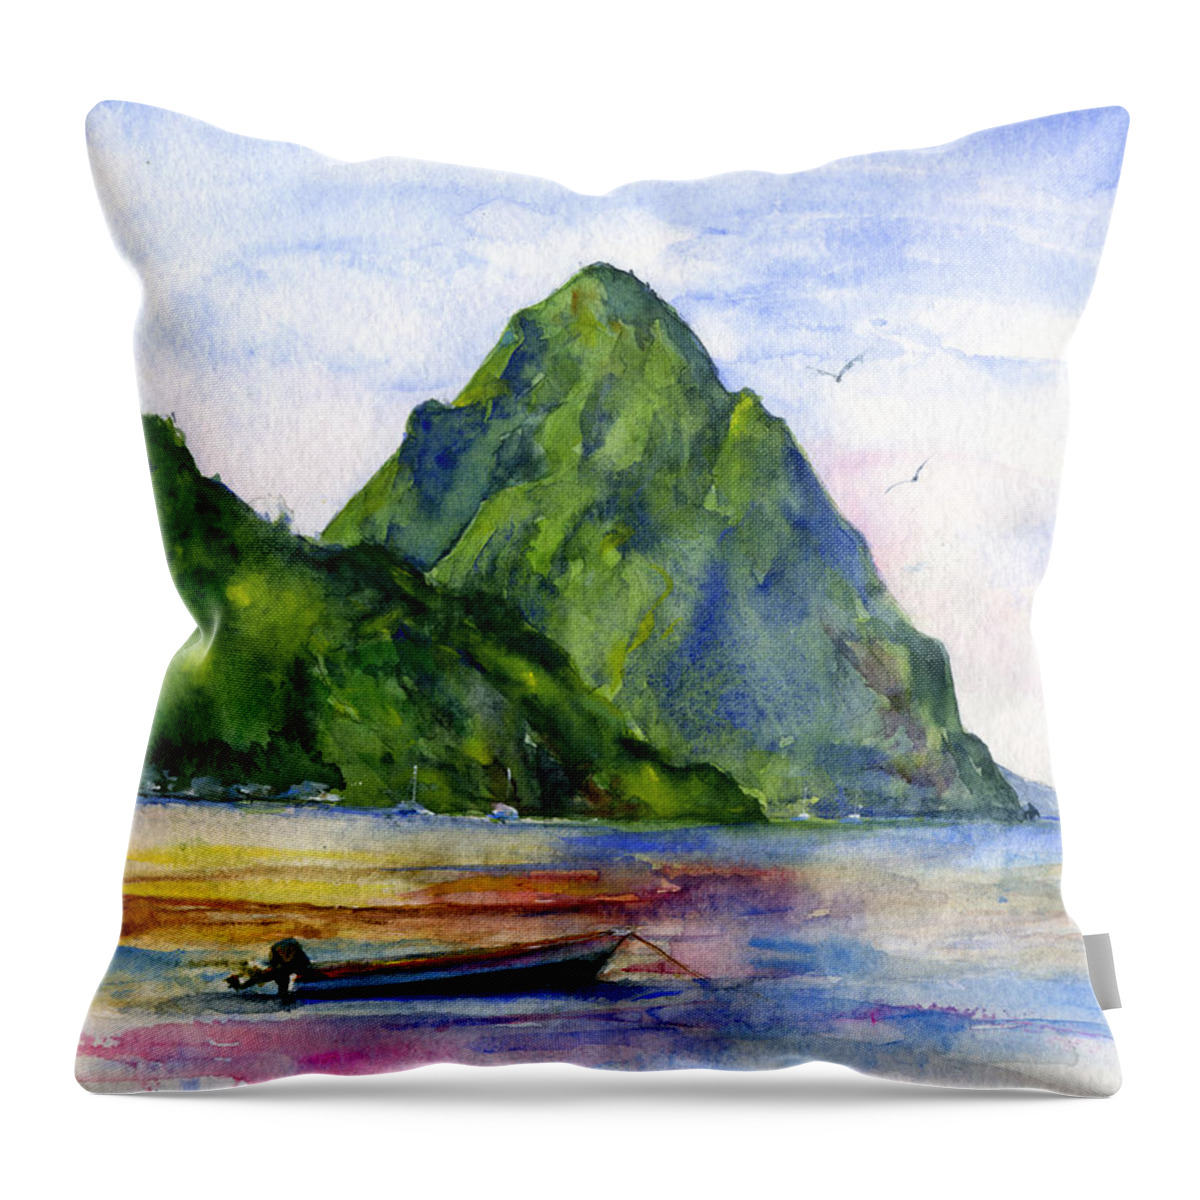 Island Throw Pillow featuring the painting St. Lucia by John D Benson